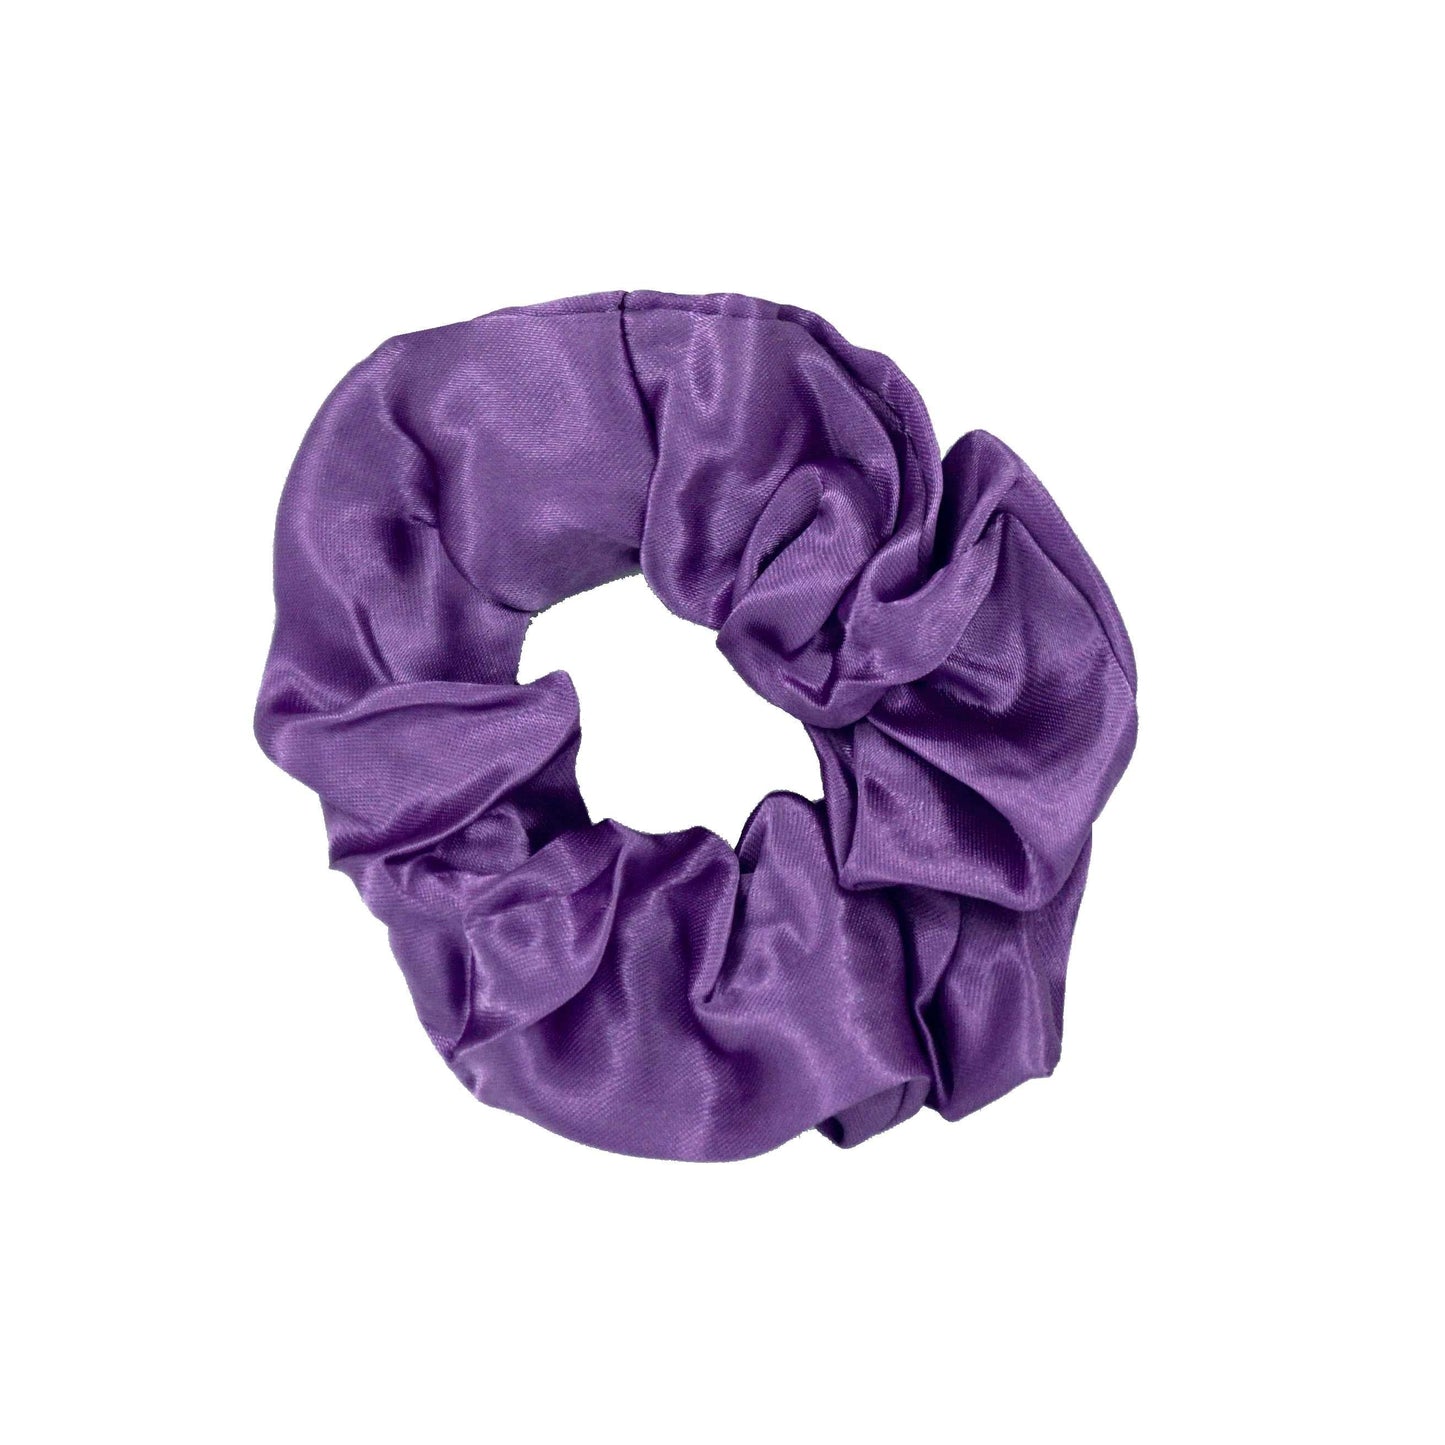 Amelia Beauty Products, Burgundy, Purple, Pink and White Satin Scrunchies, 3.5in Diameter, Gentle on Hair, Strong Hold, No Snag, No Dents or Creases. 8 Pack - 12 Retail Packs